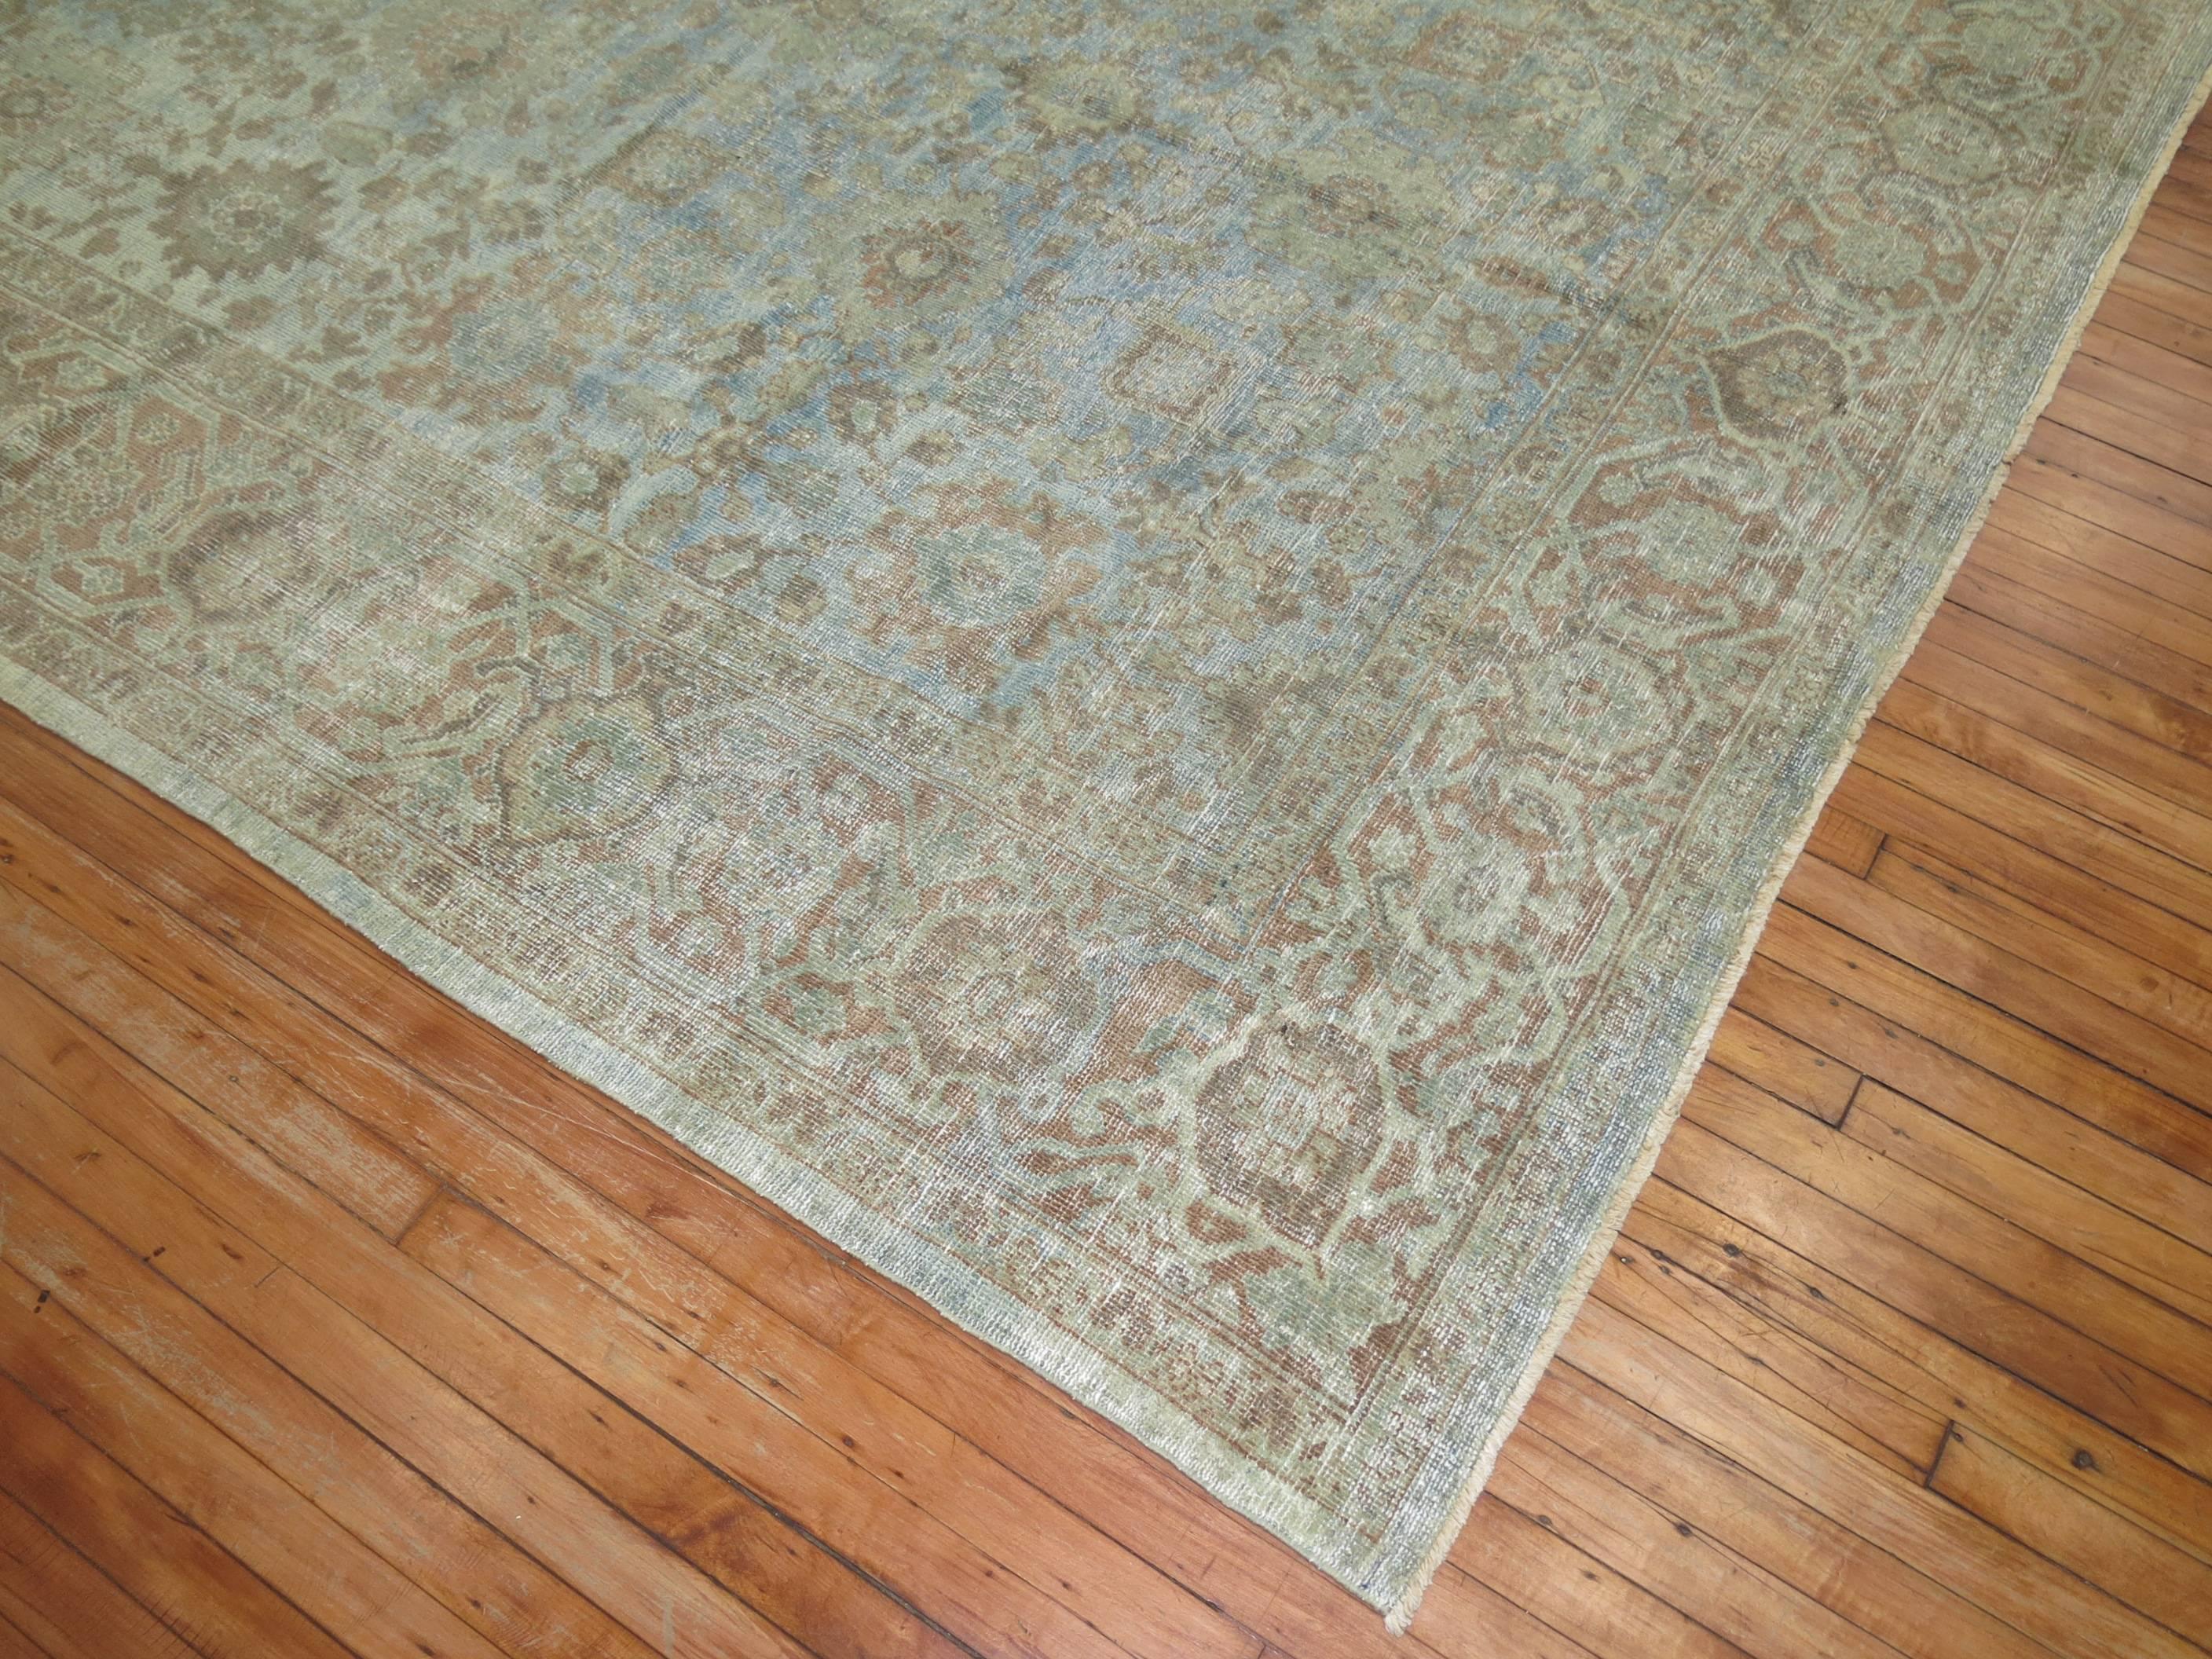 An early 20th century decorative Persian Mahal rug in a predominant unique watery blue tone. Accents in light green and soft brown. Perfect amount of wear with incredible texture and patina.

Measures: 8'4